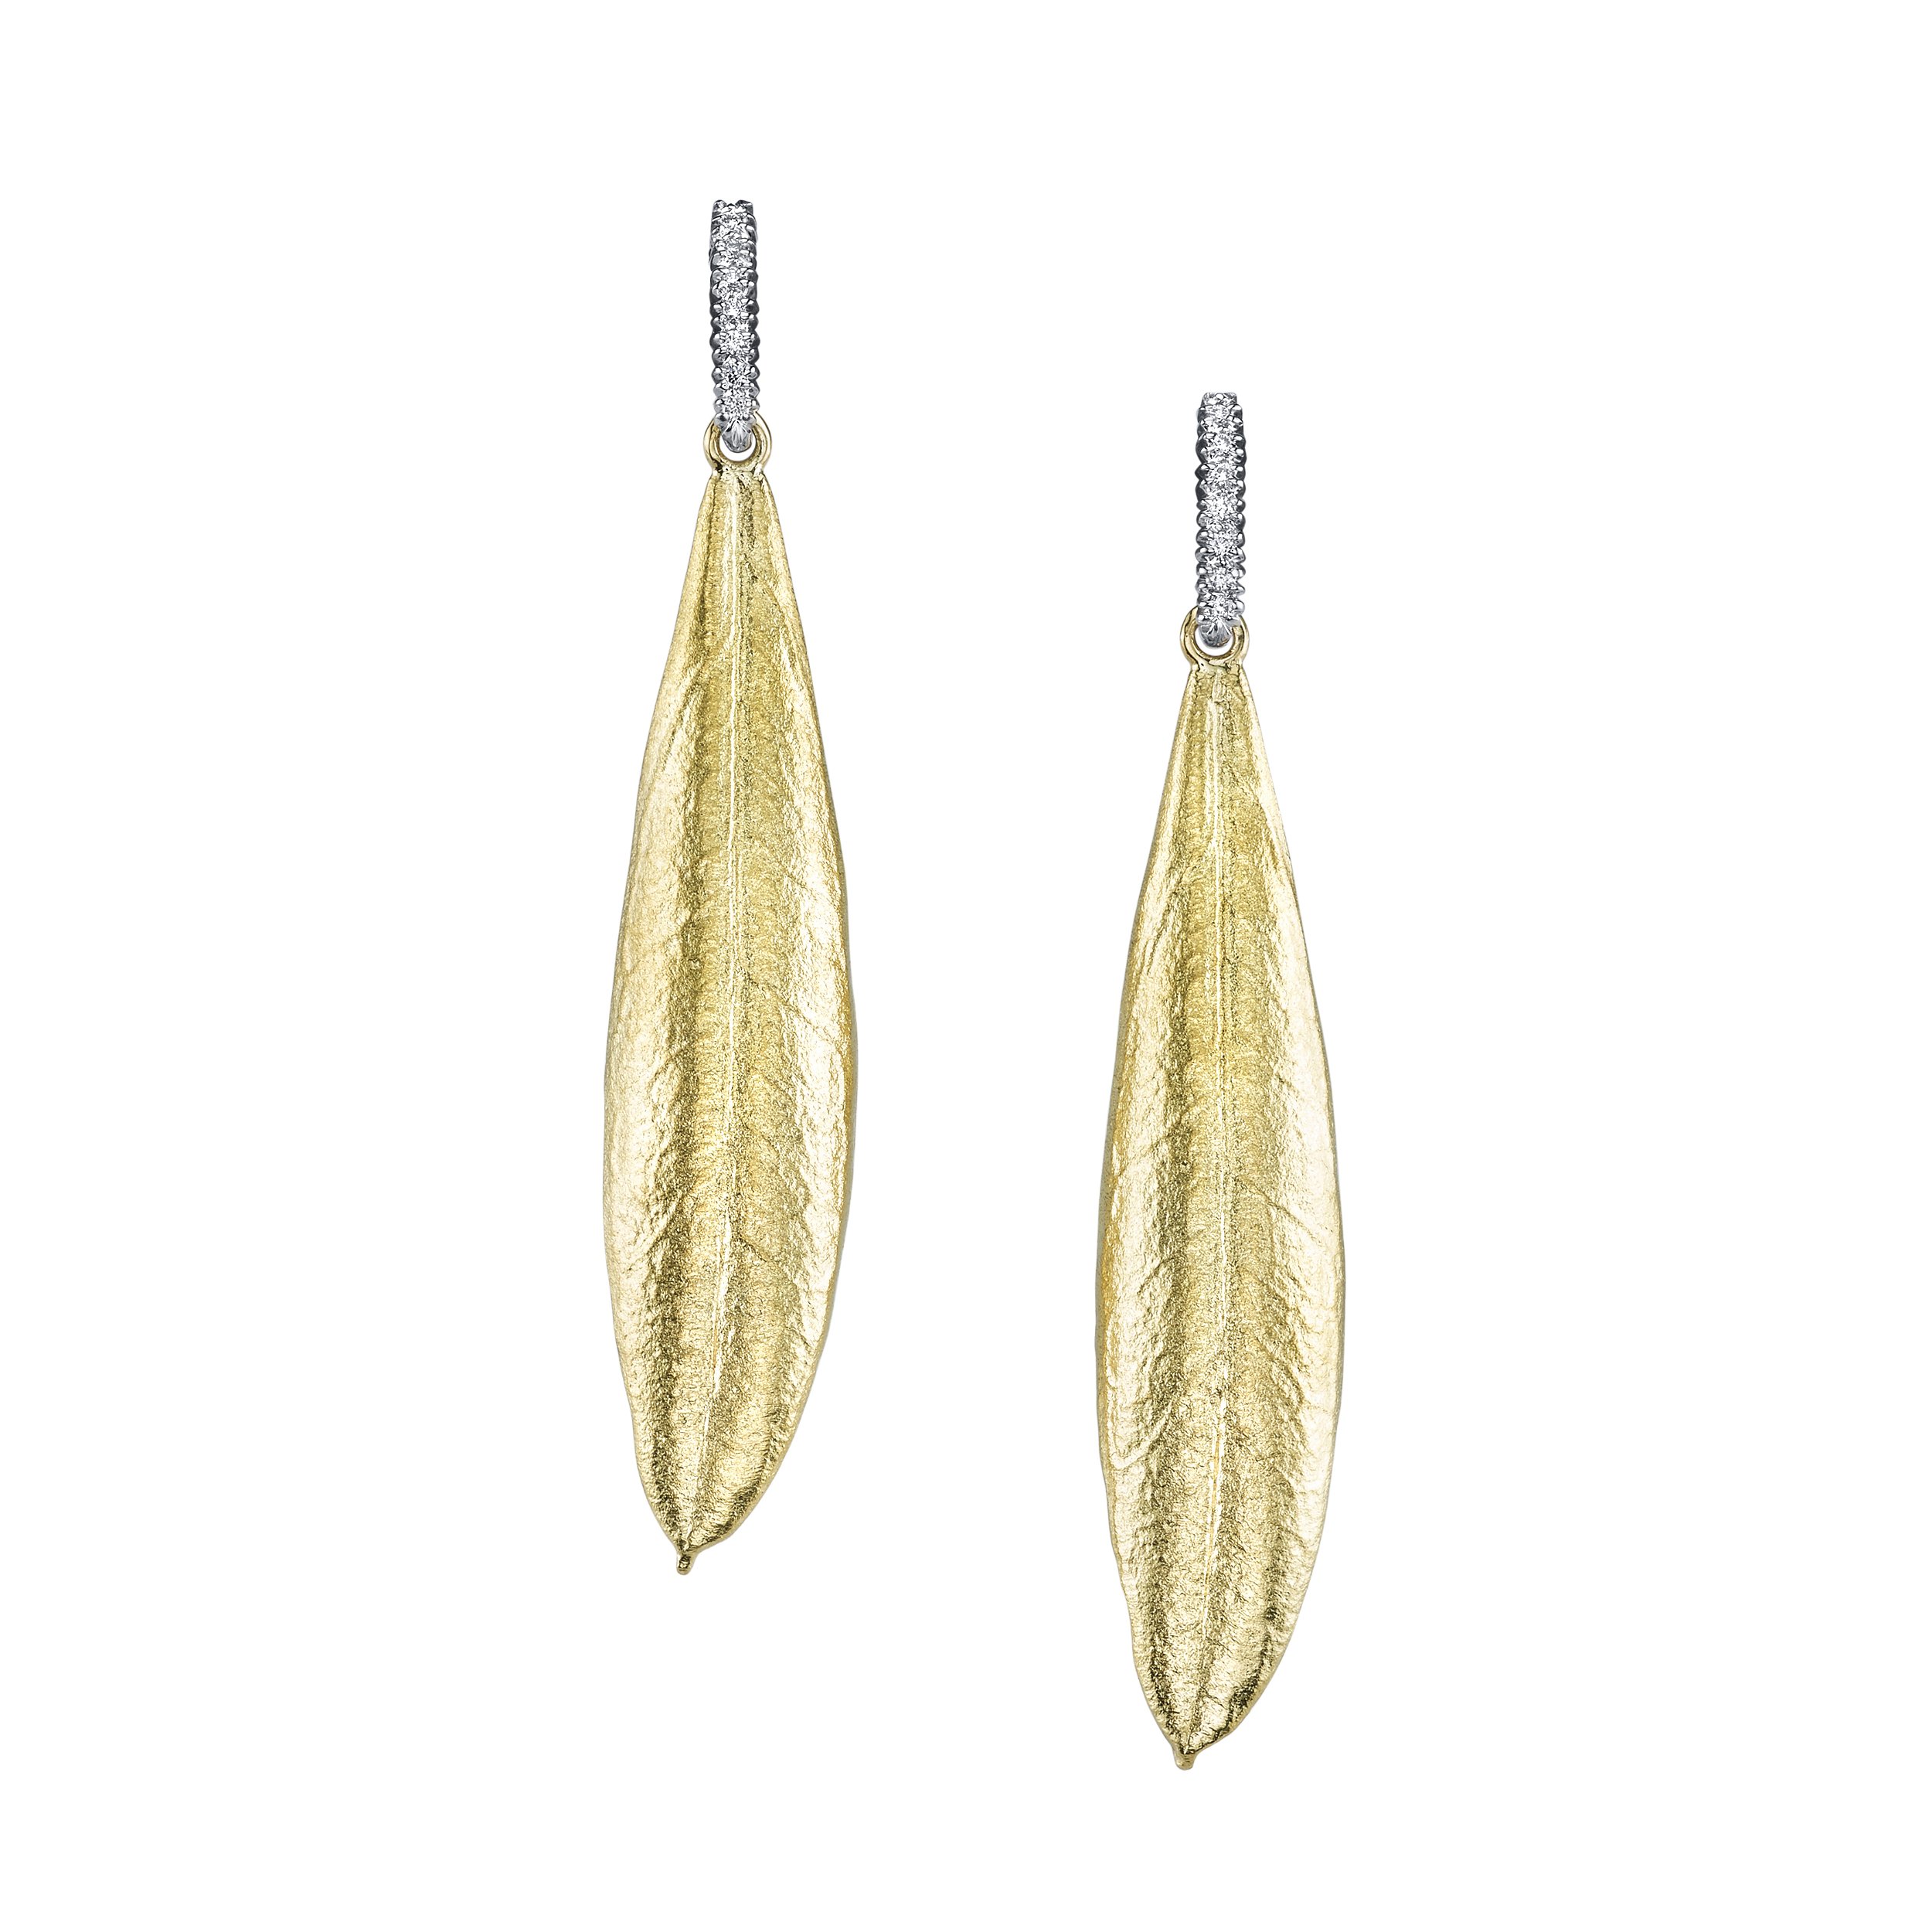 Medium Olive Leaf Earrings with Diamond Bars in 19kt Yellow Gold